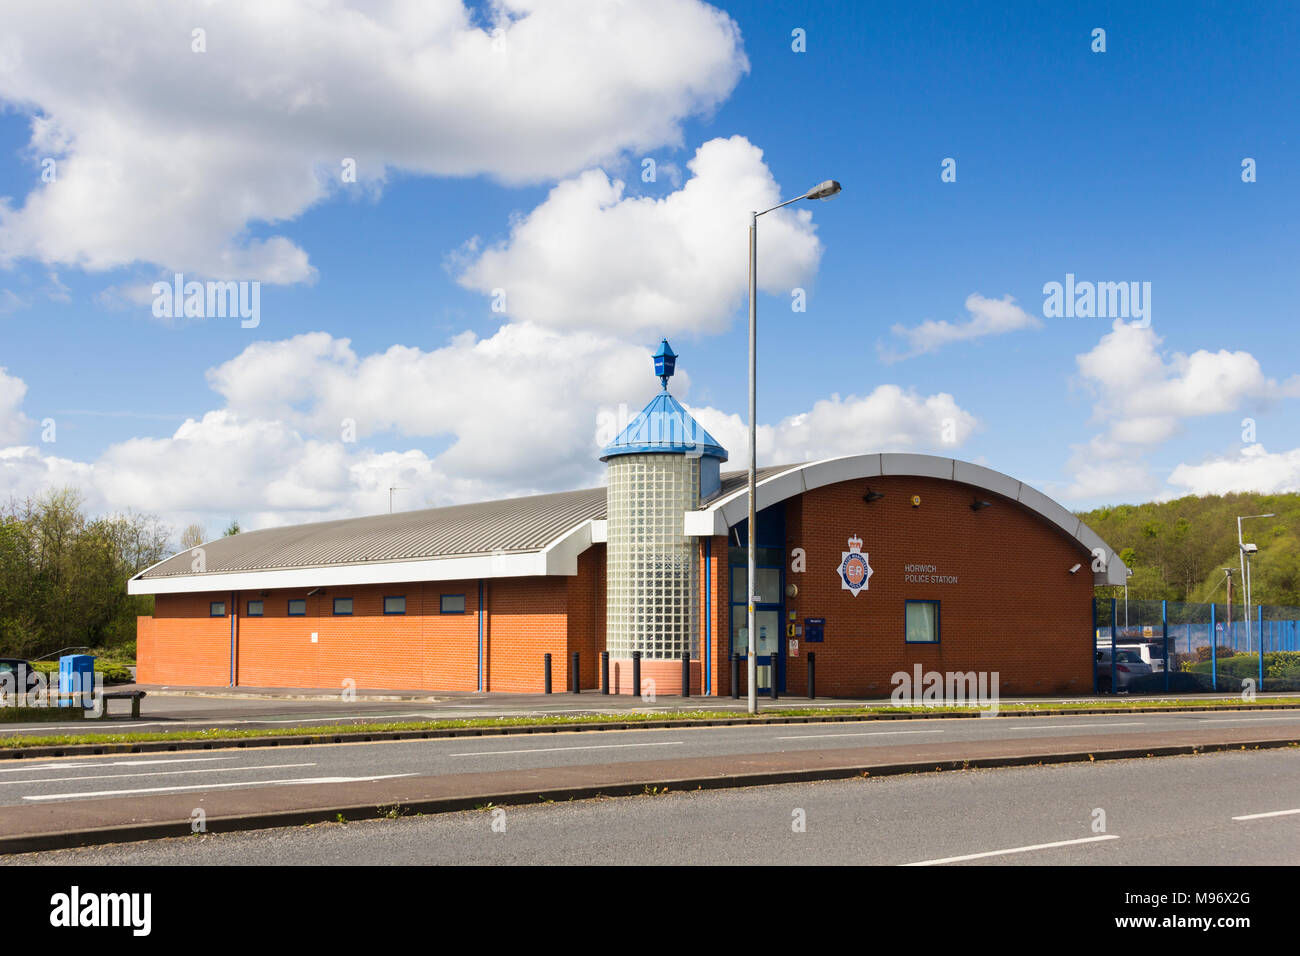 Police station exterior at Middlebrook, Horwich near Bolton. Stock Photo